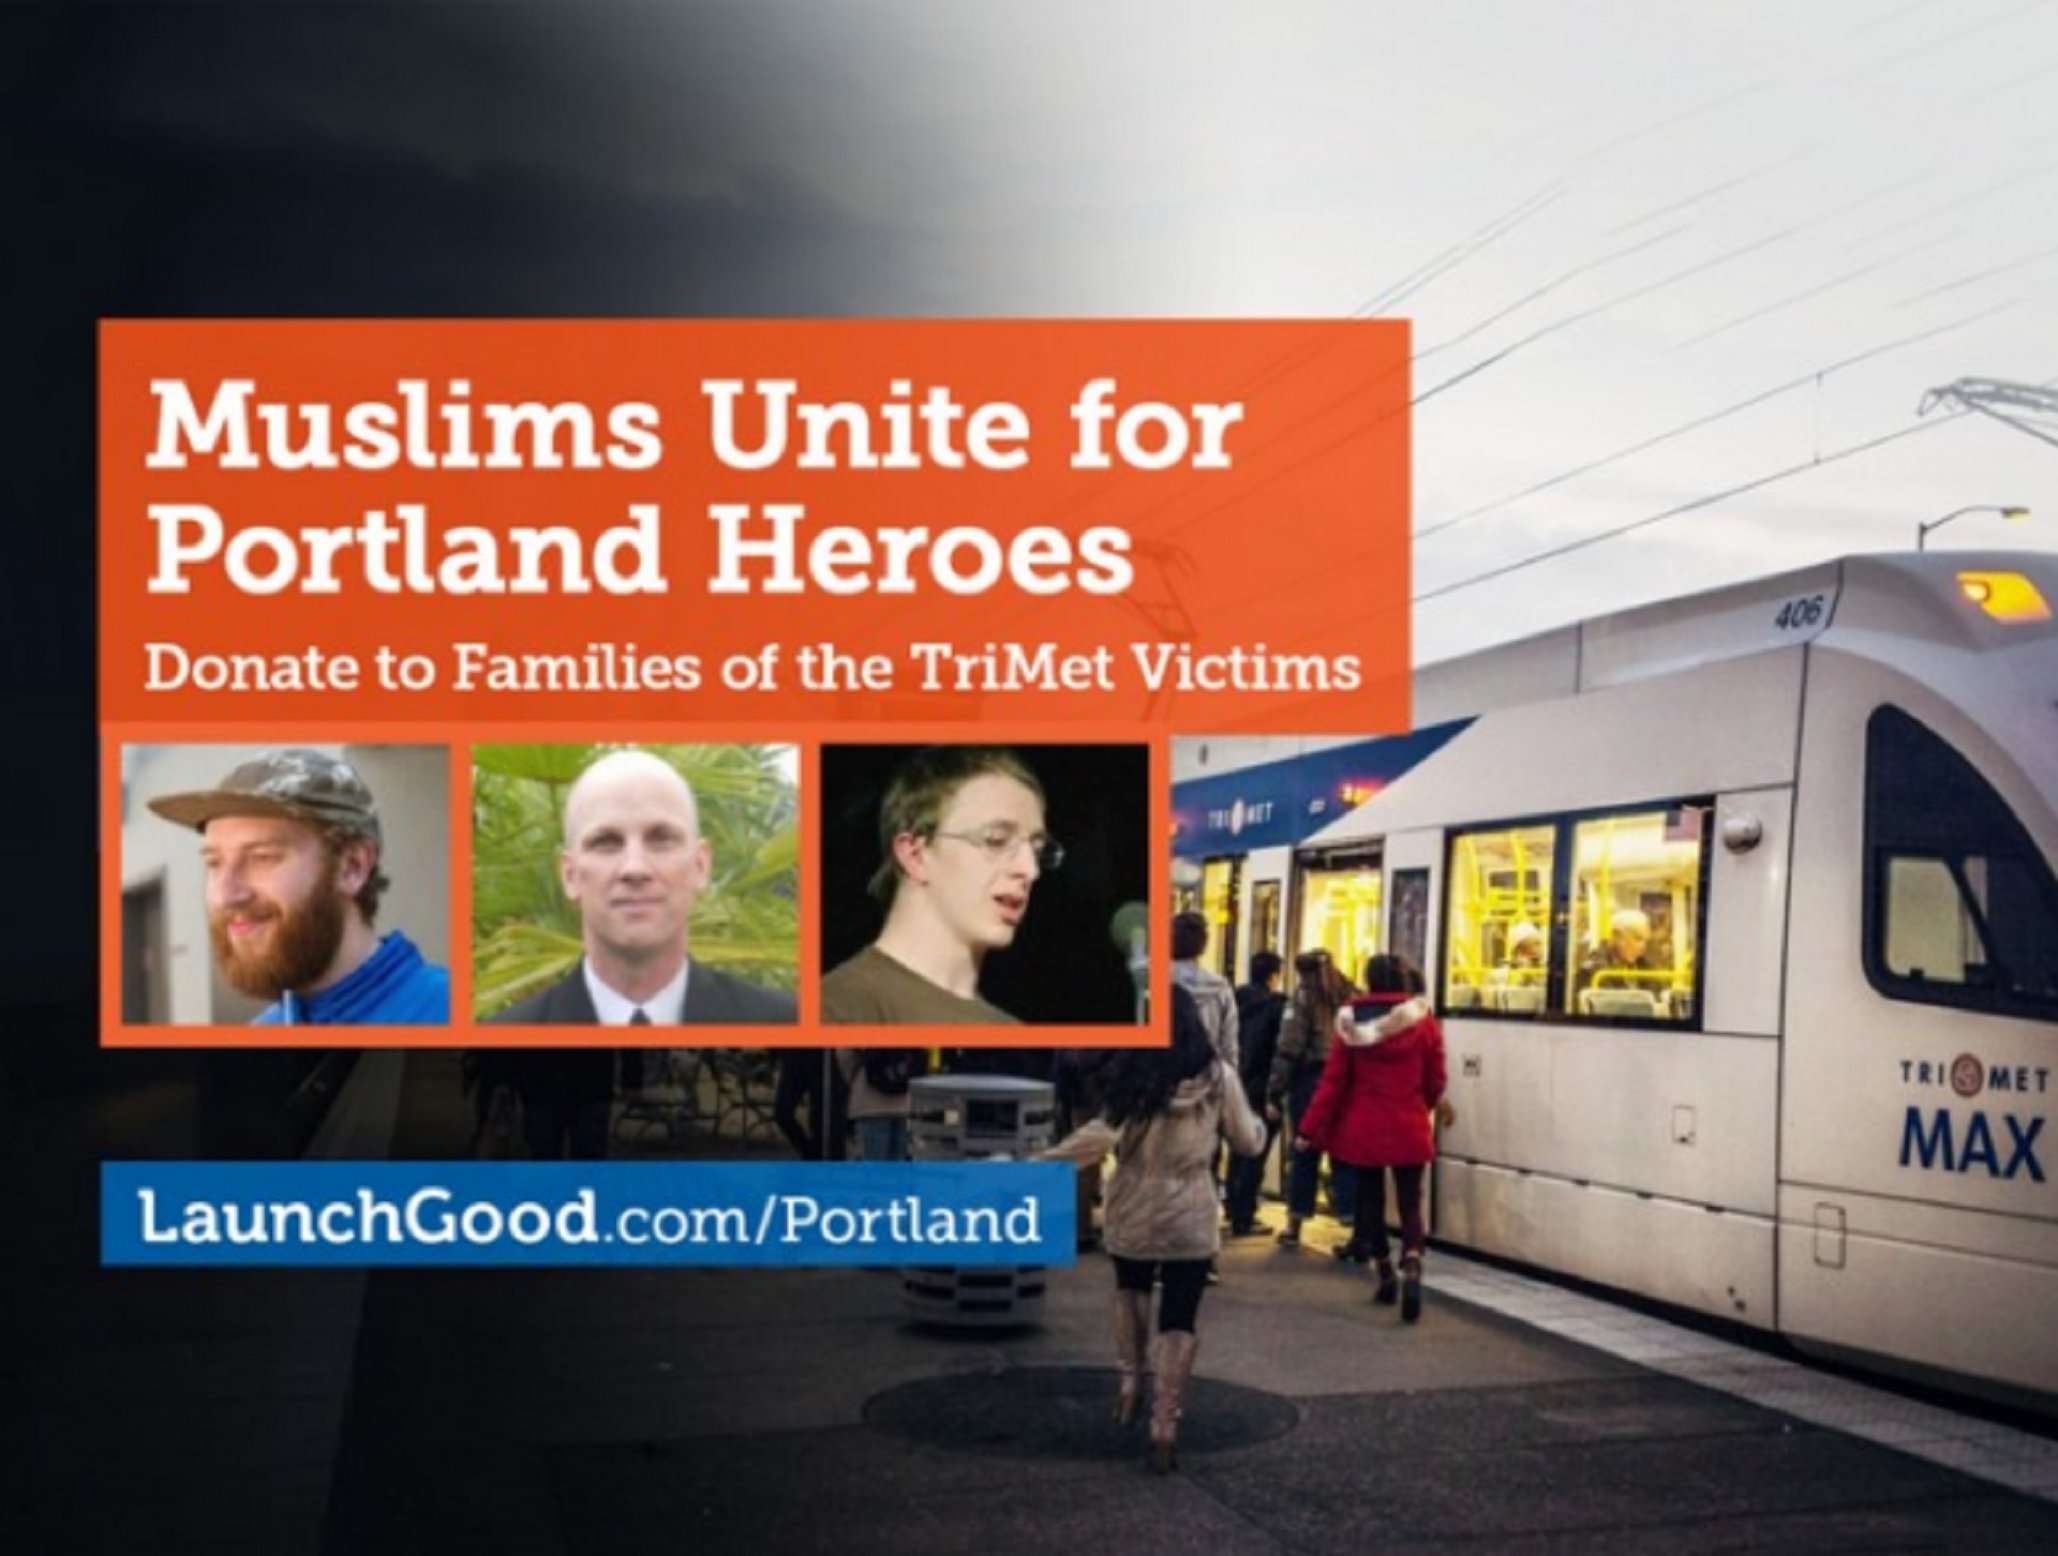 image for Muslim groups raise $500,000 for the victims of the Portland attacks